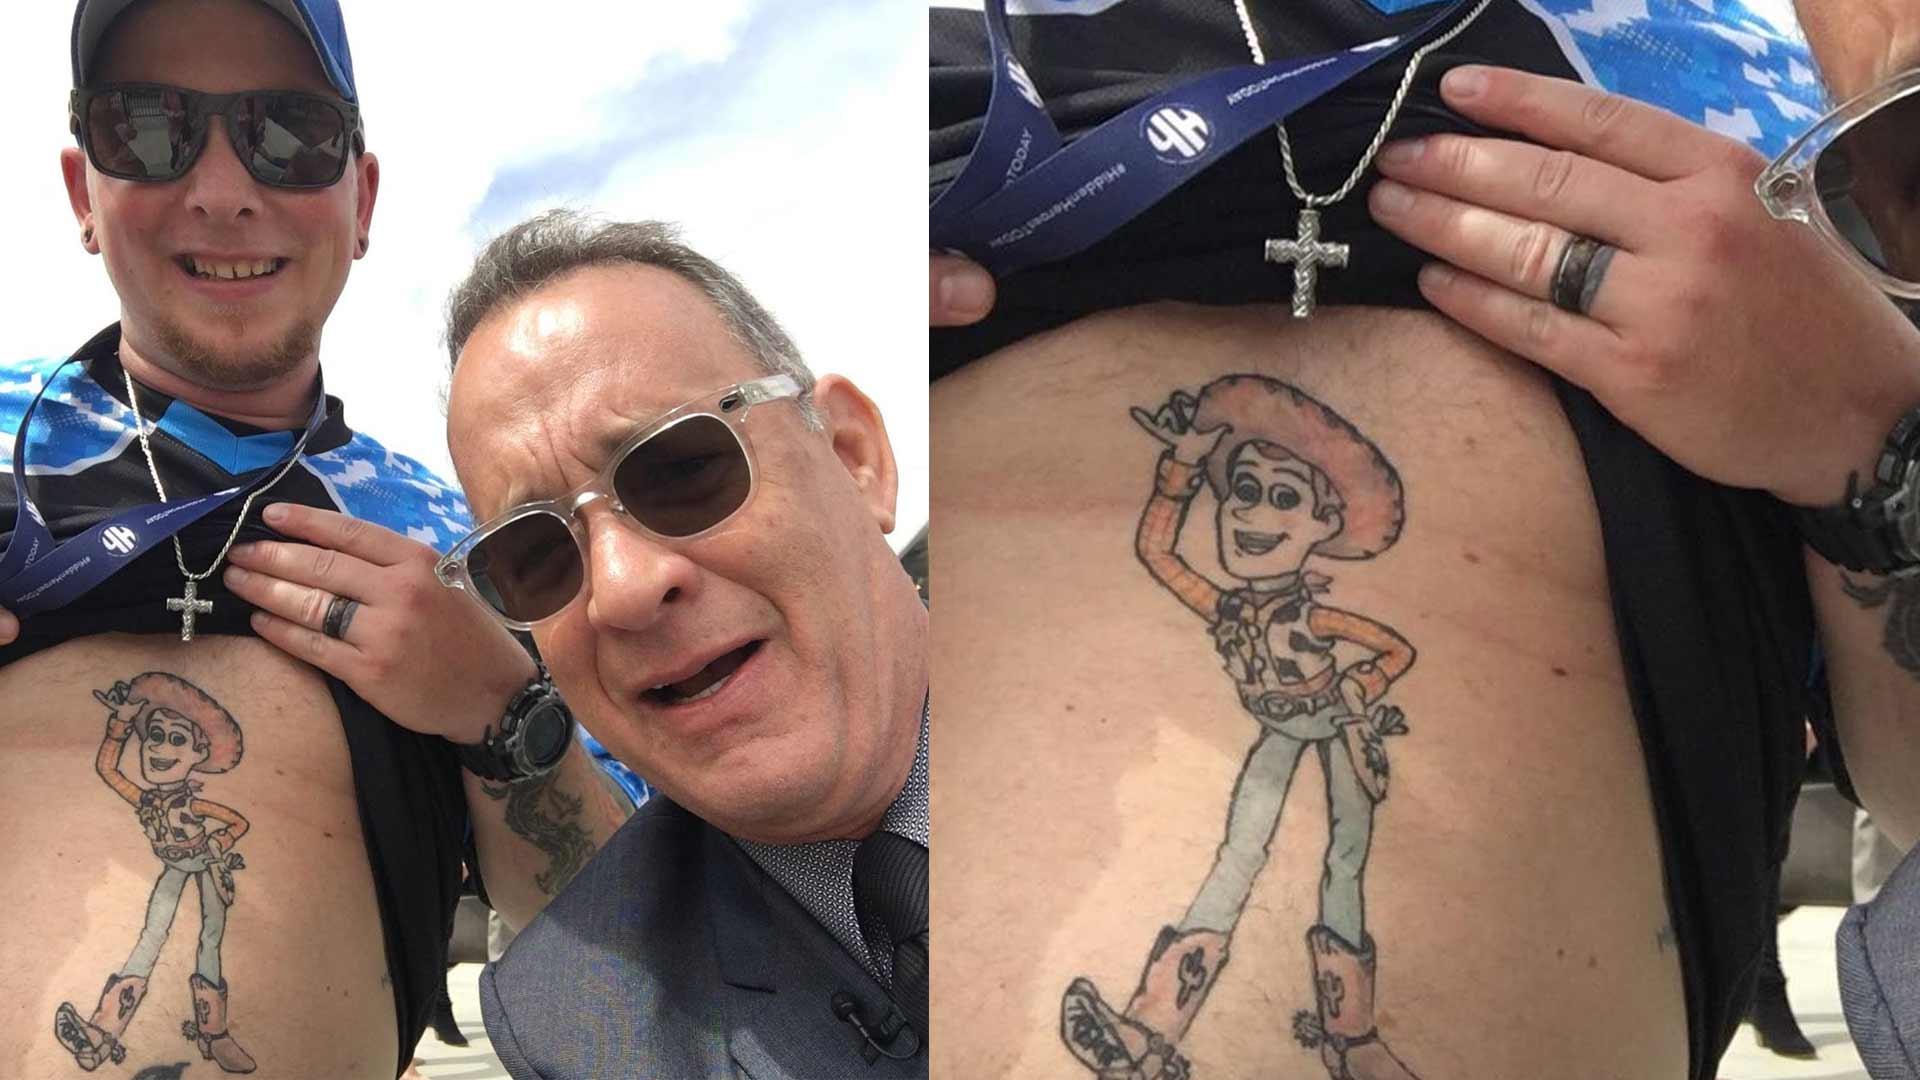 Tom Hanks Gives Stamp of Approval to Man With ‘Toy Story’ Stomach Tattoo